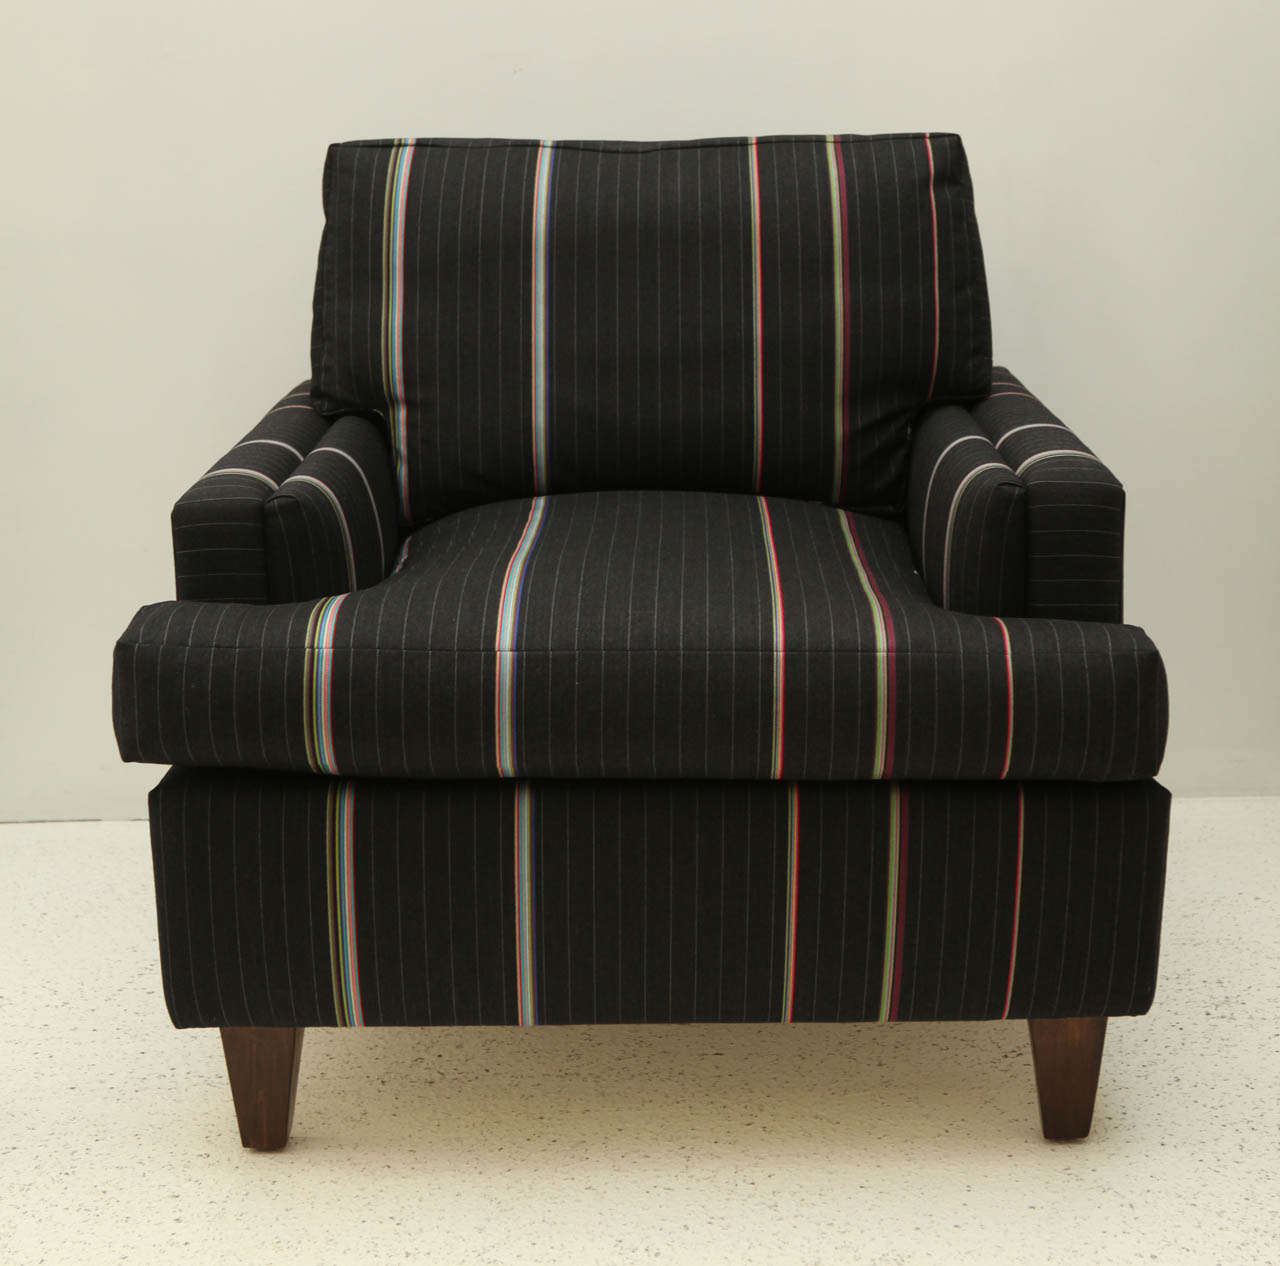 A handsome pair of club chairs, reminiscent of Haines classic Seniah, upholstered in a classic wool pinstripe fabric with a twist designed by Paul Smith for Maharam. The chairs have nice detailing and tapered walnut-stained legs.